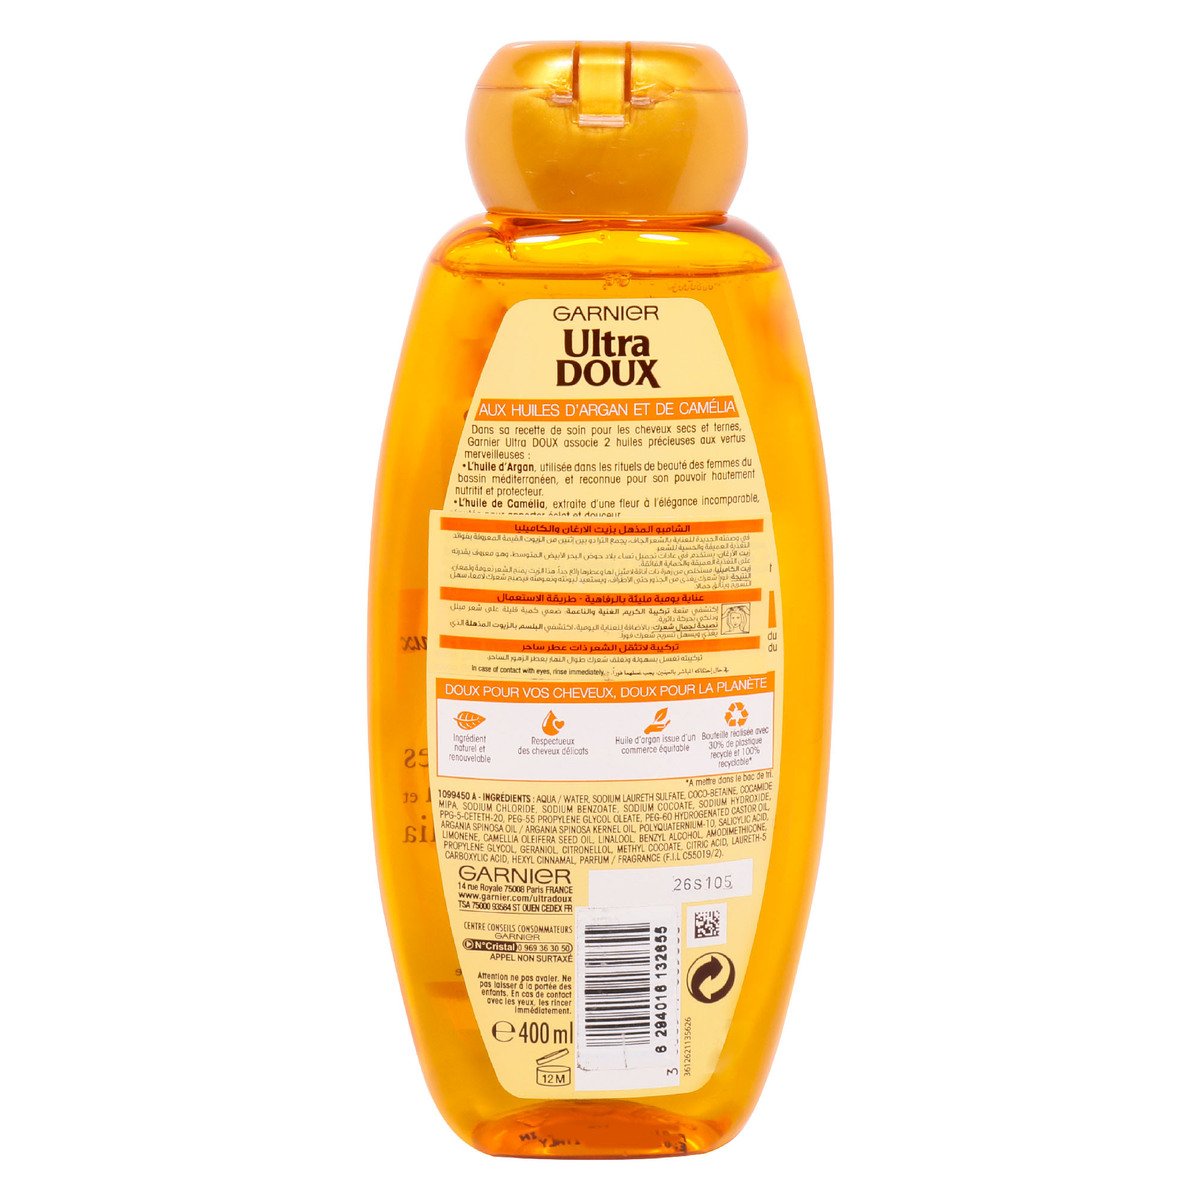 Garnier Ultra Doux The Marvelous Shampoo With Argen And Camelia Oils 400 ml